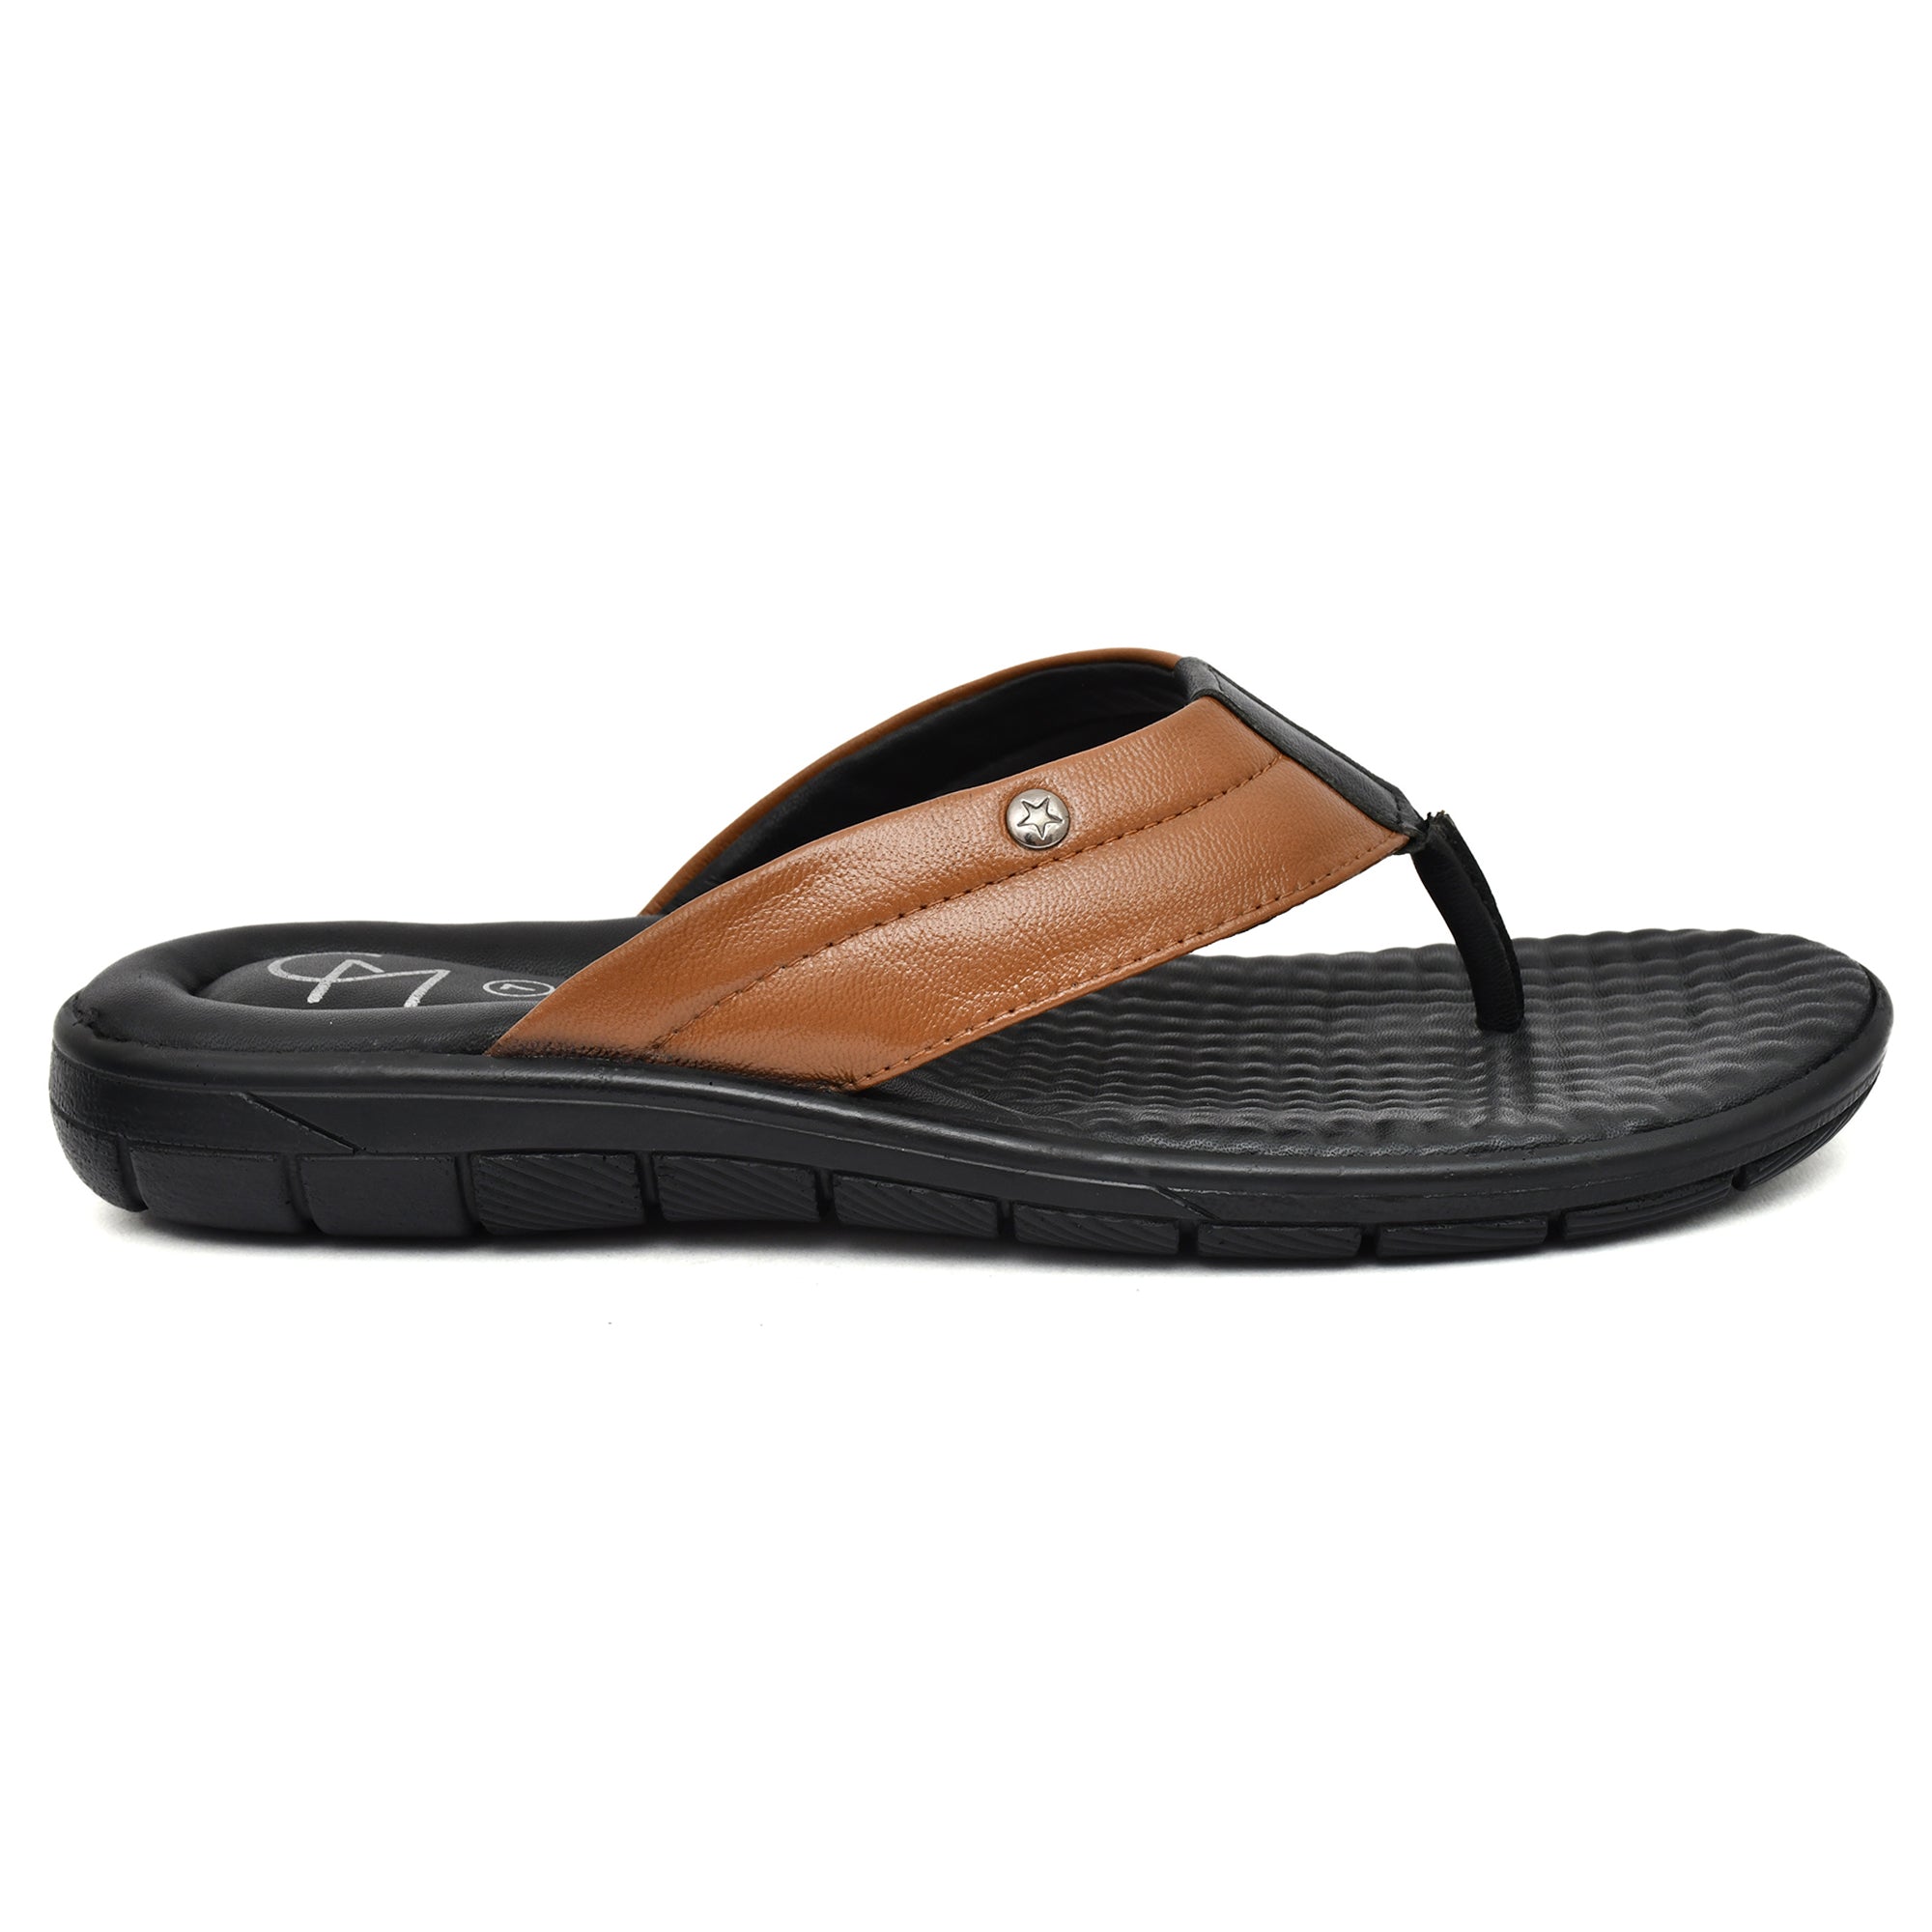 CM Leather slippers for men's